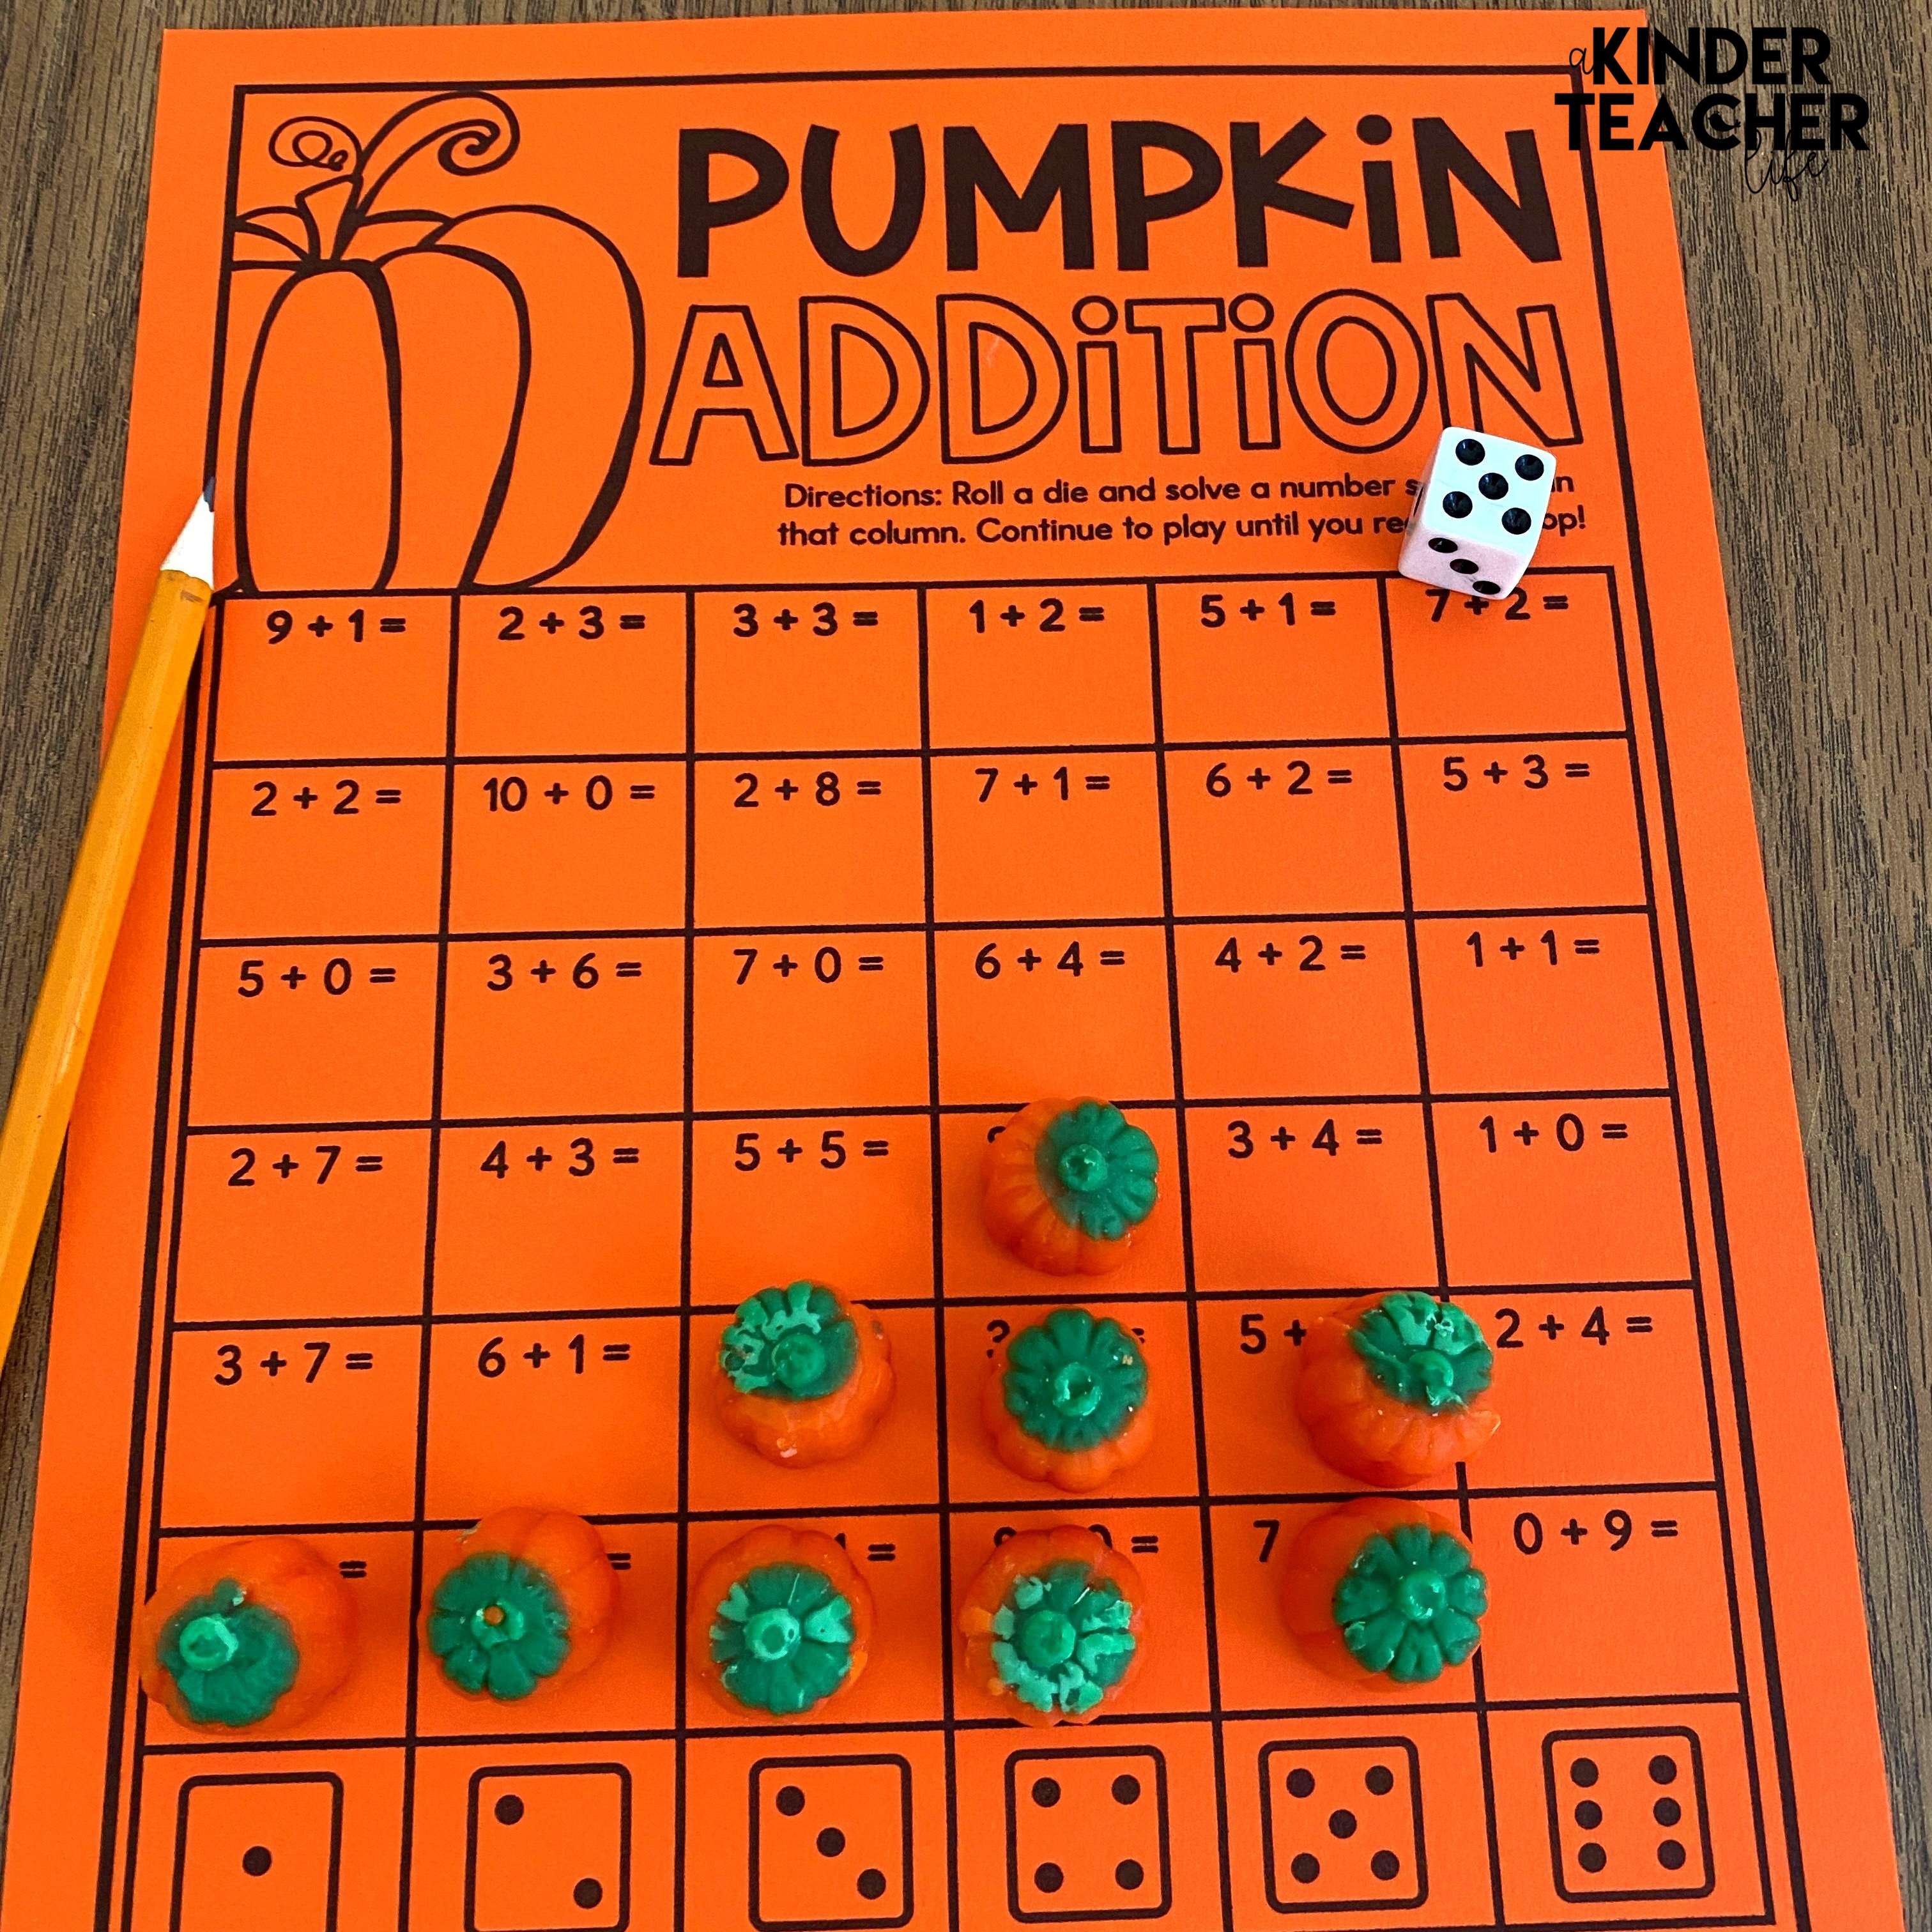 Halloween and Fall Freebies - Here are some math and reading activities you can implement during your fall or Halloween party.